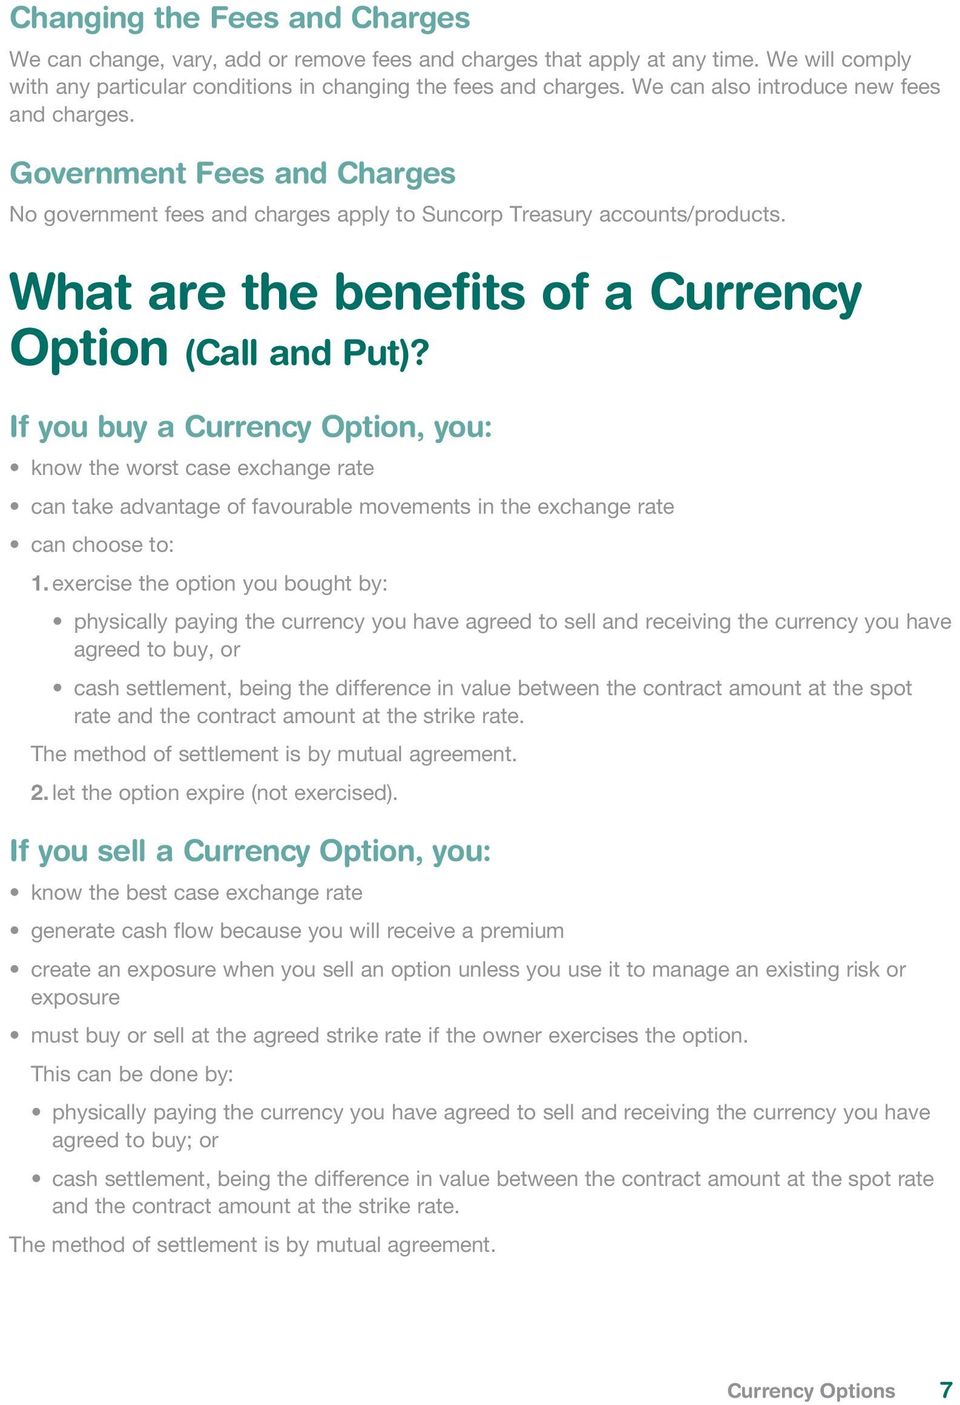 What are the benefits of a Currency Option (Call and Put)?